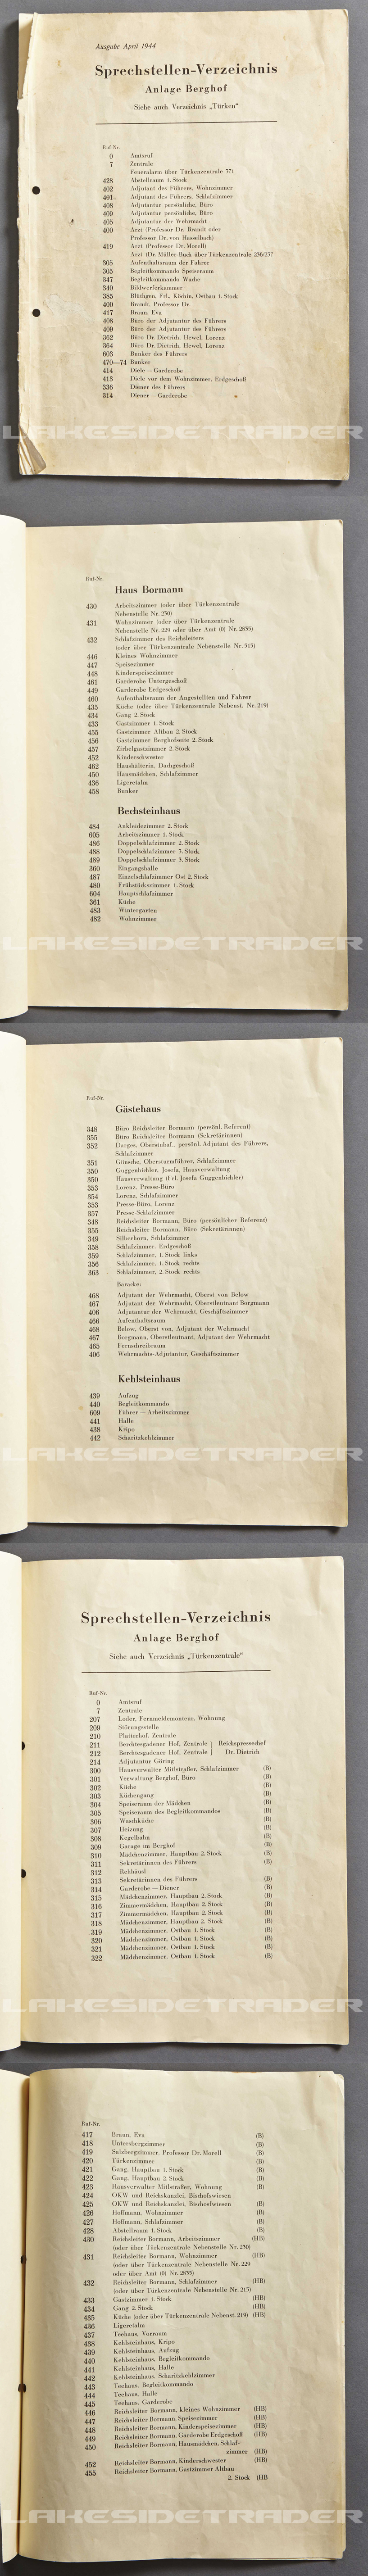 Phone Stations Directory for the Berghof